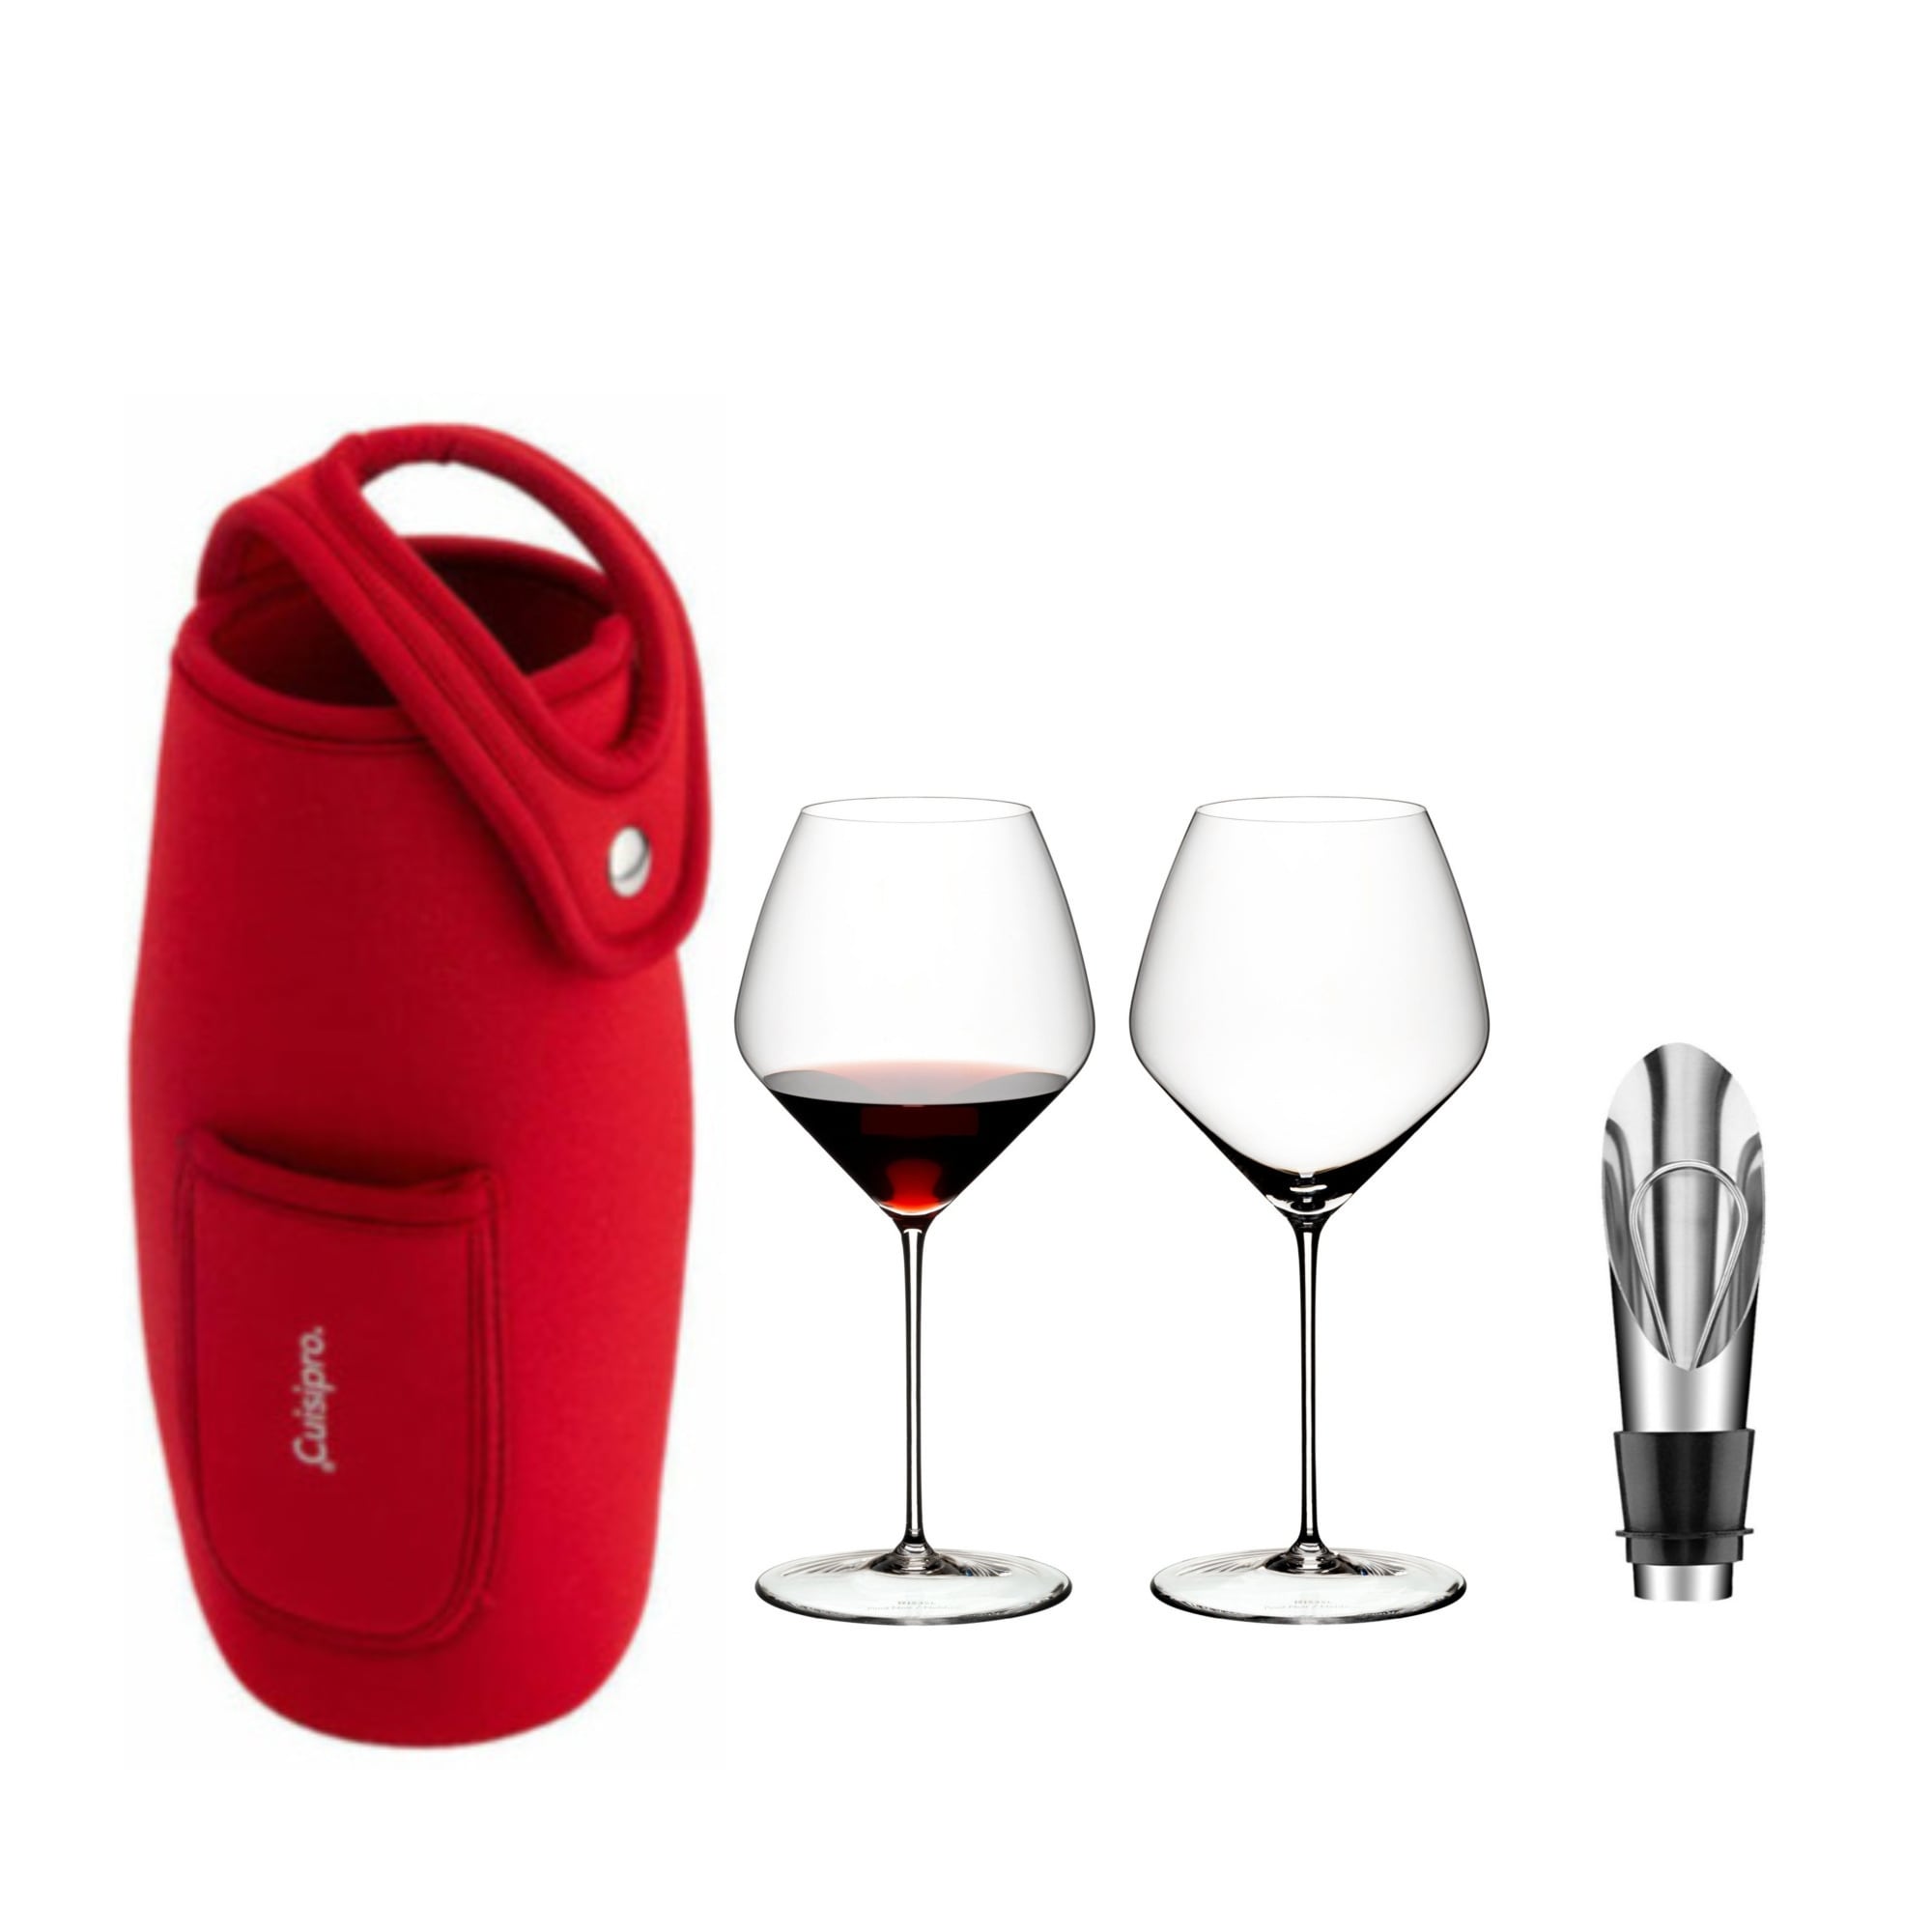 https://ak1.ostkcdn.com/images/products/is/images/direct/d2ad5e8c4d30dcede594dfc874c1af4c70db13dd/Riedel-Veloce-Pinot-Noir-Nebbiolo-Glasses-%28Set-of-2%29-With-Accessories.jpg